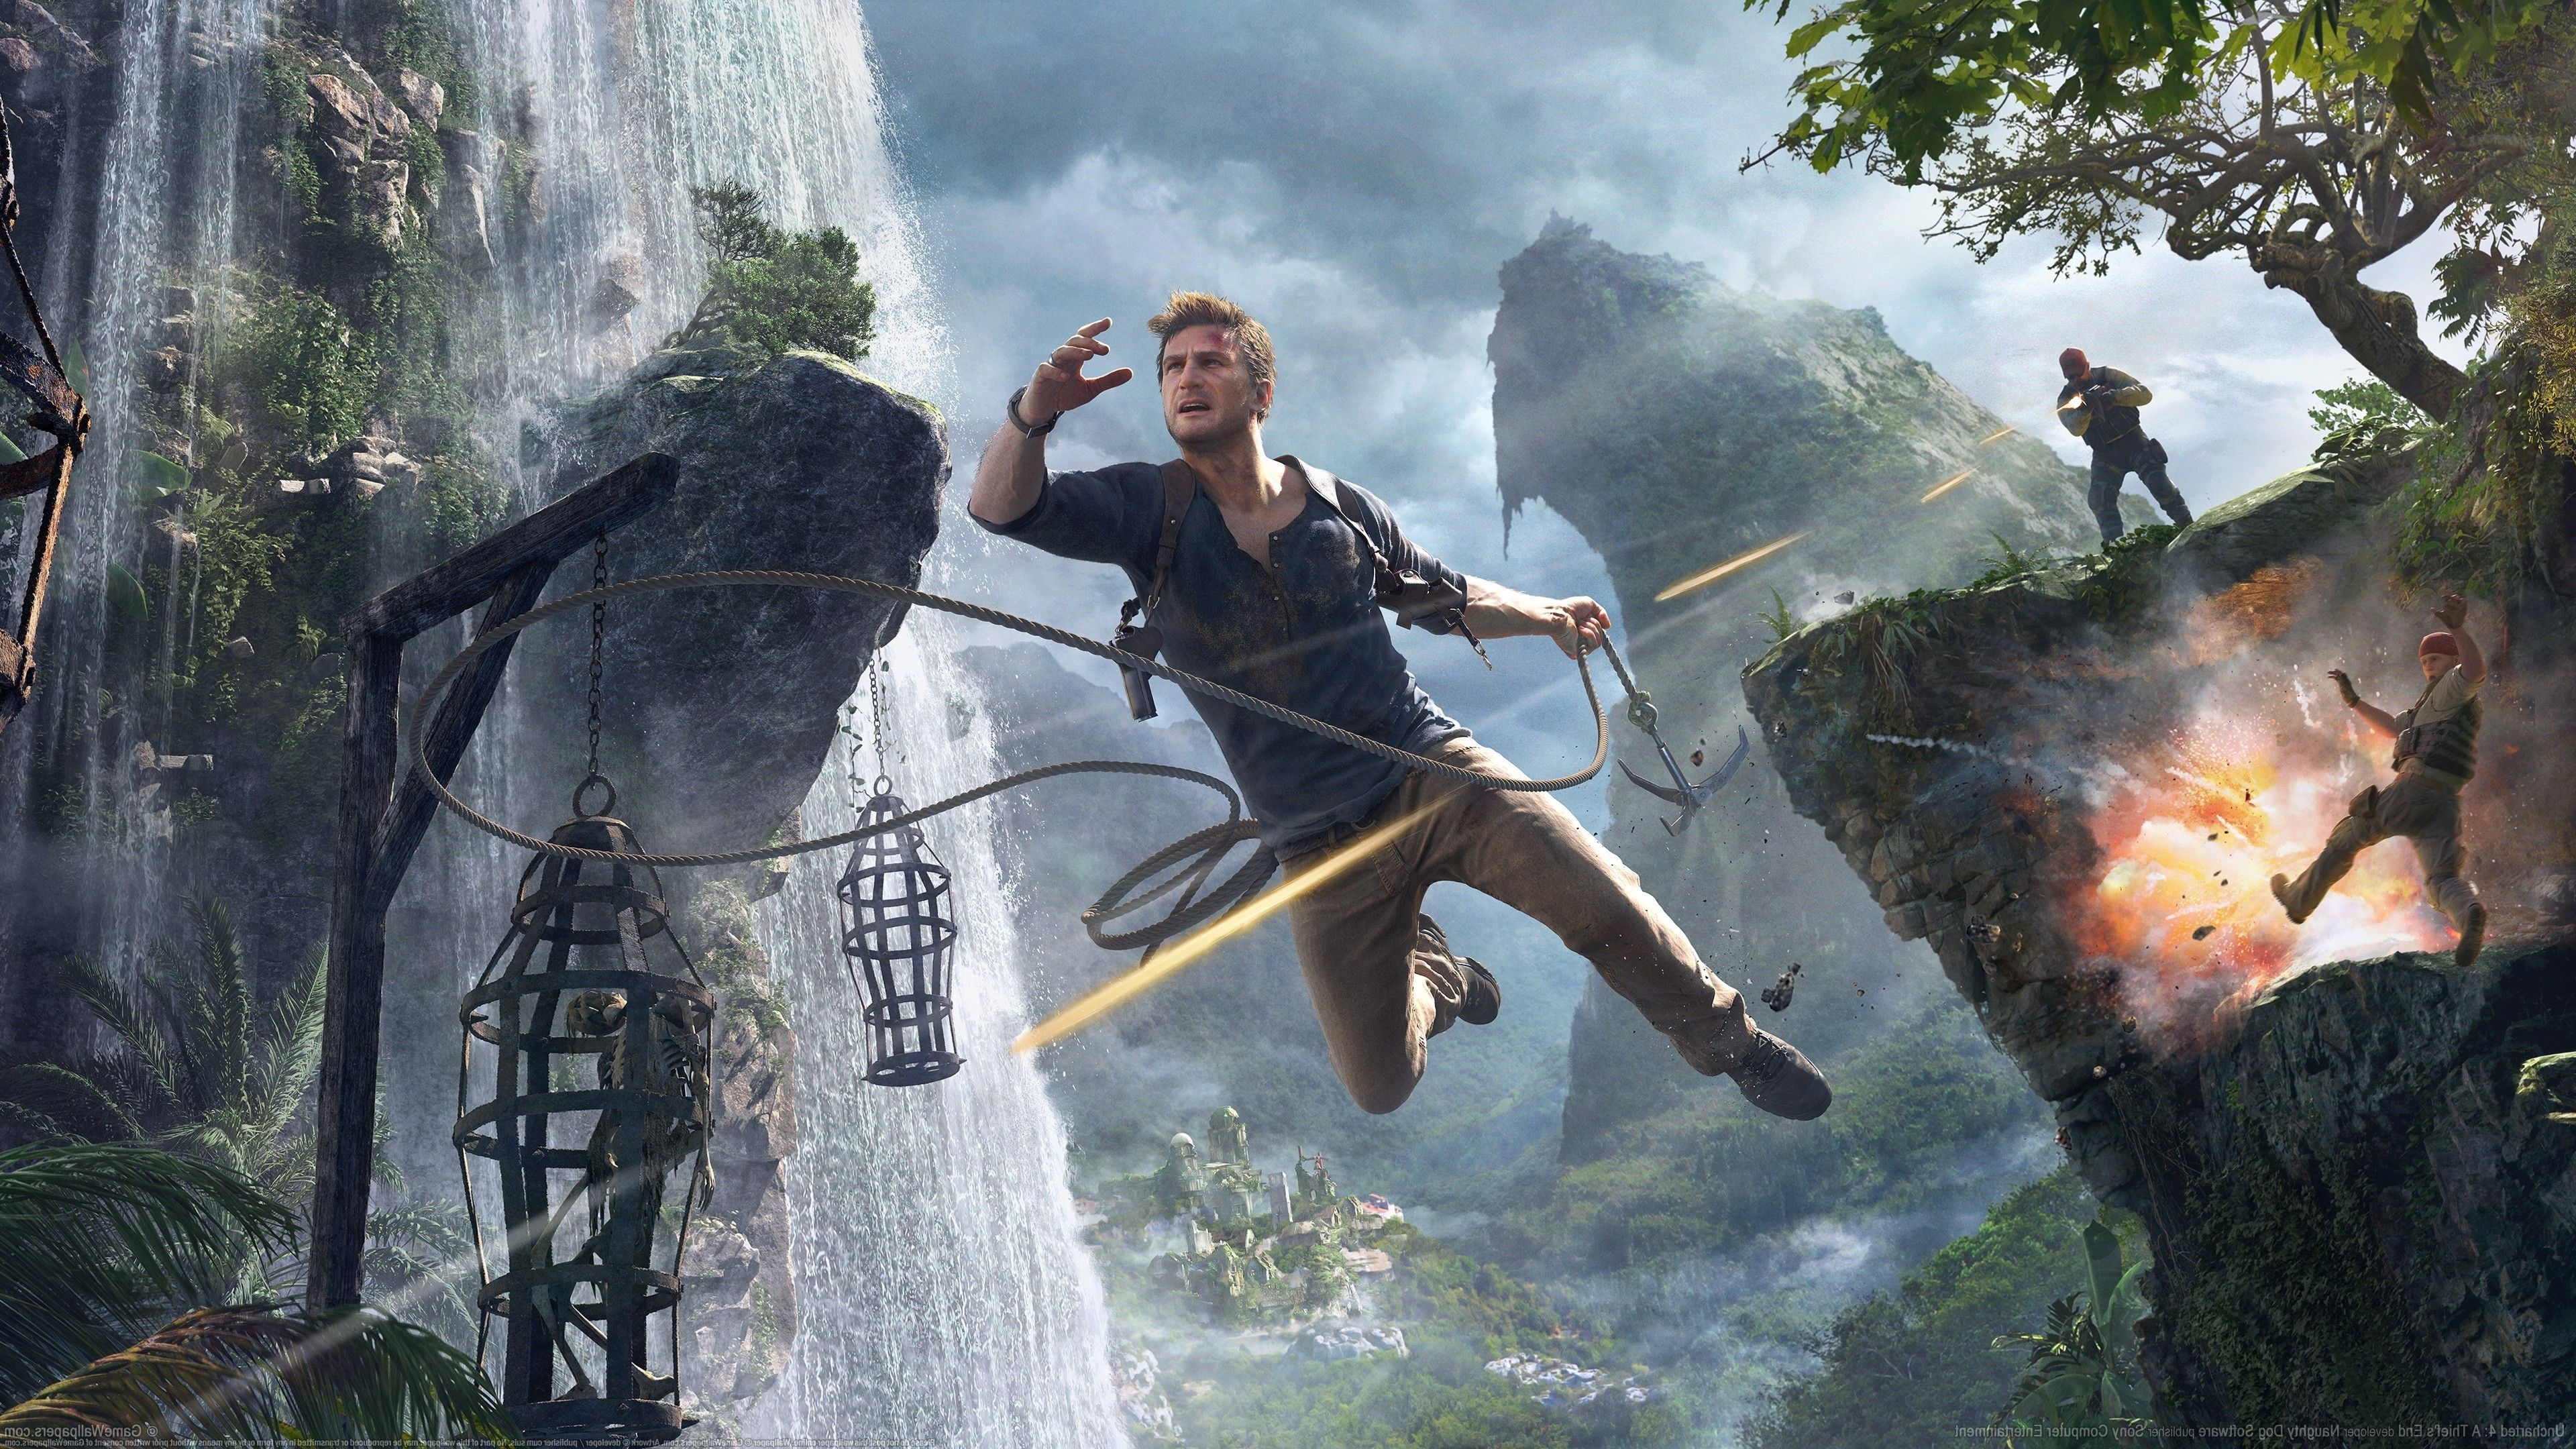 Nathan Drake in Uncharted 4 A Thief's End Jumping with gunfire